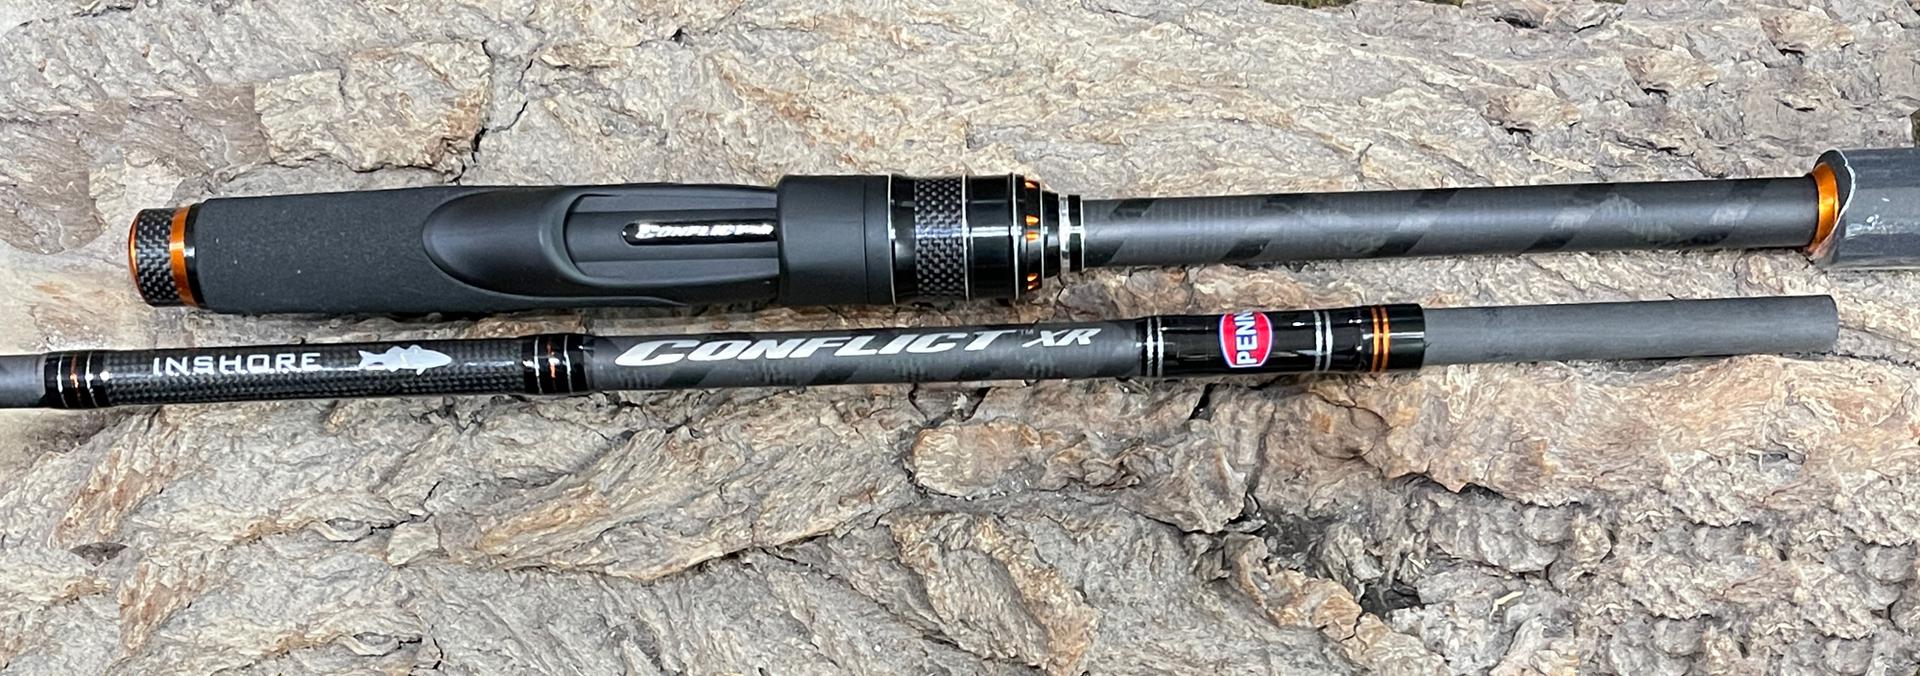 New Rods from Penn - Review From High Street Tackle - North Devon